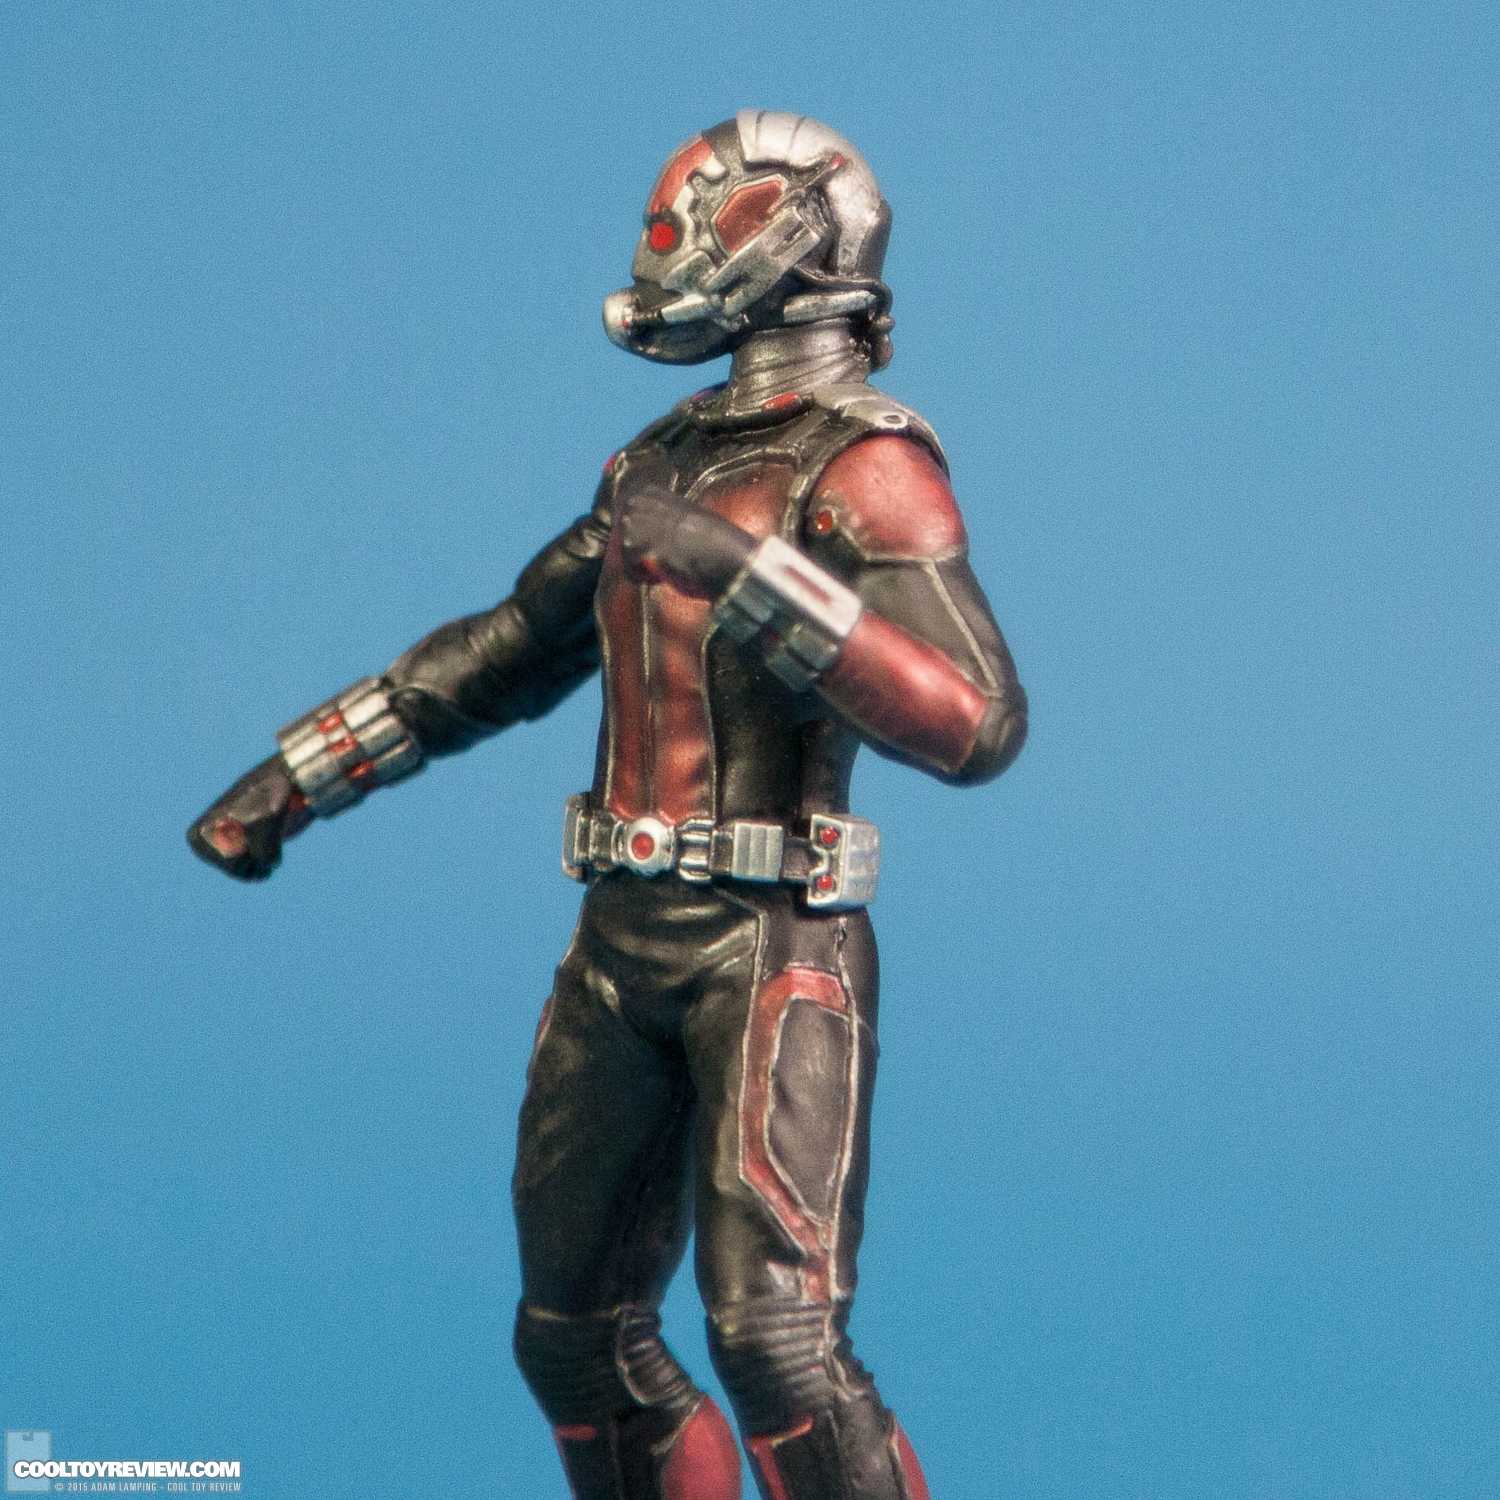 gentle-giant-ant-man-statue-2015-convention-exclusive-007.jpg